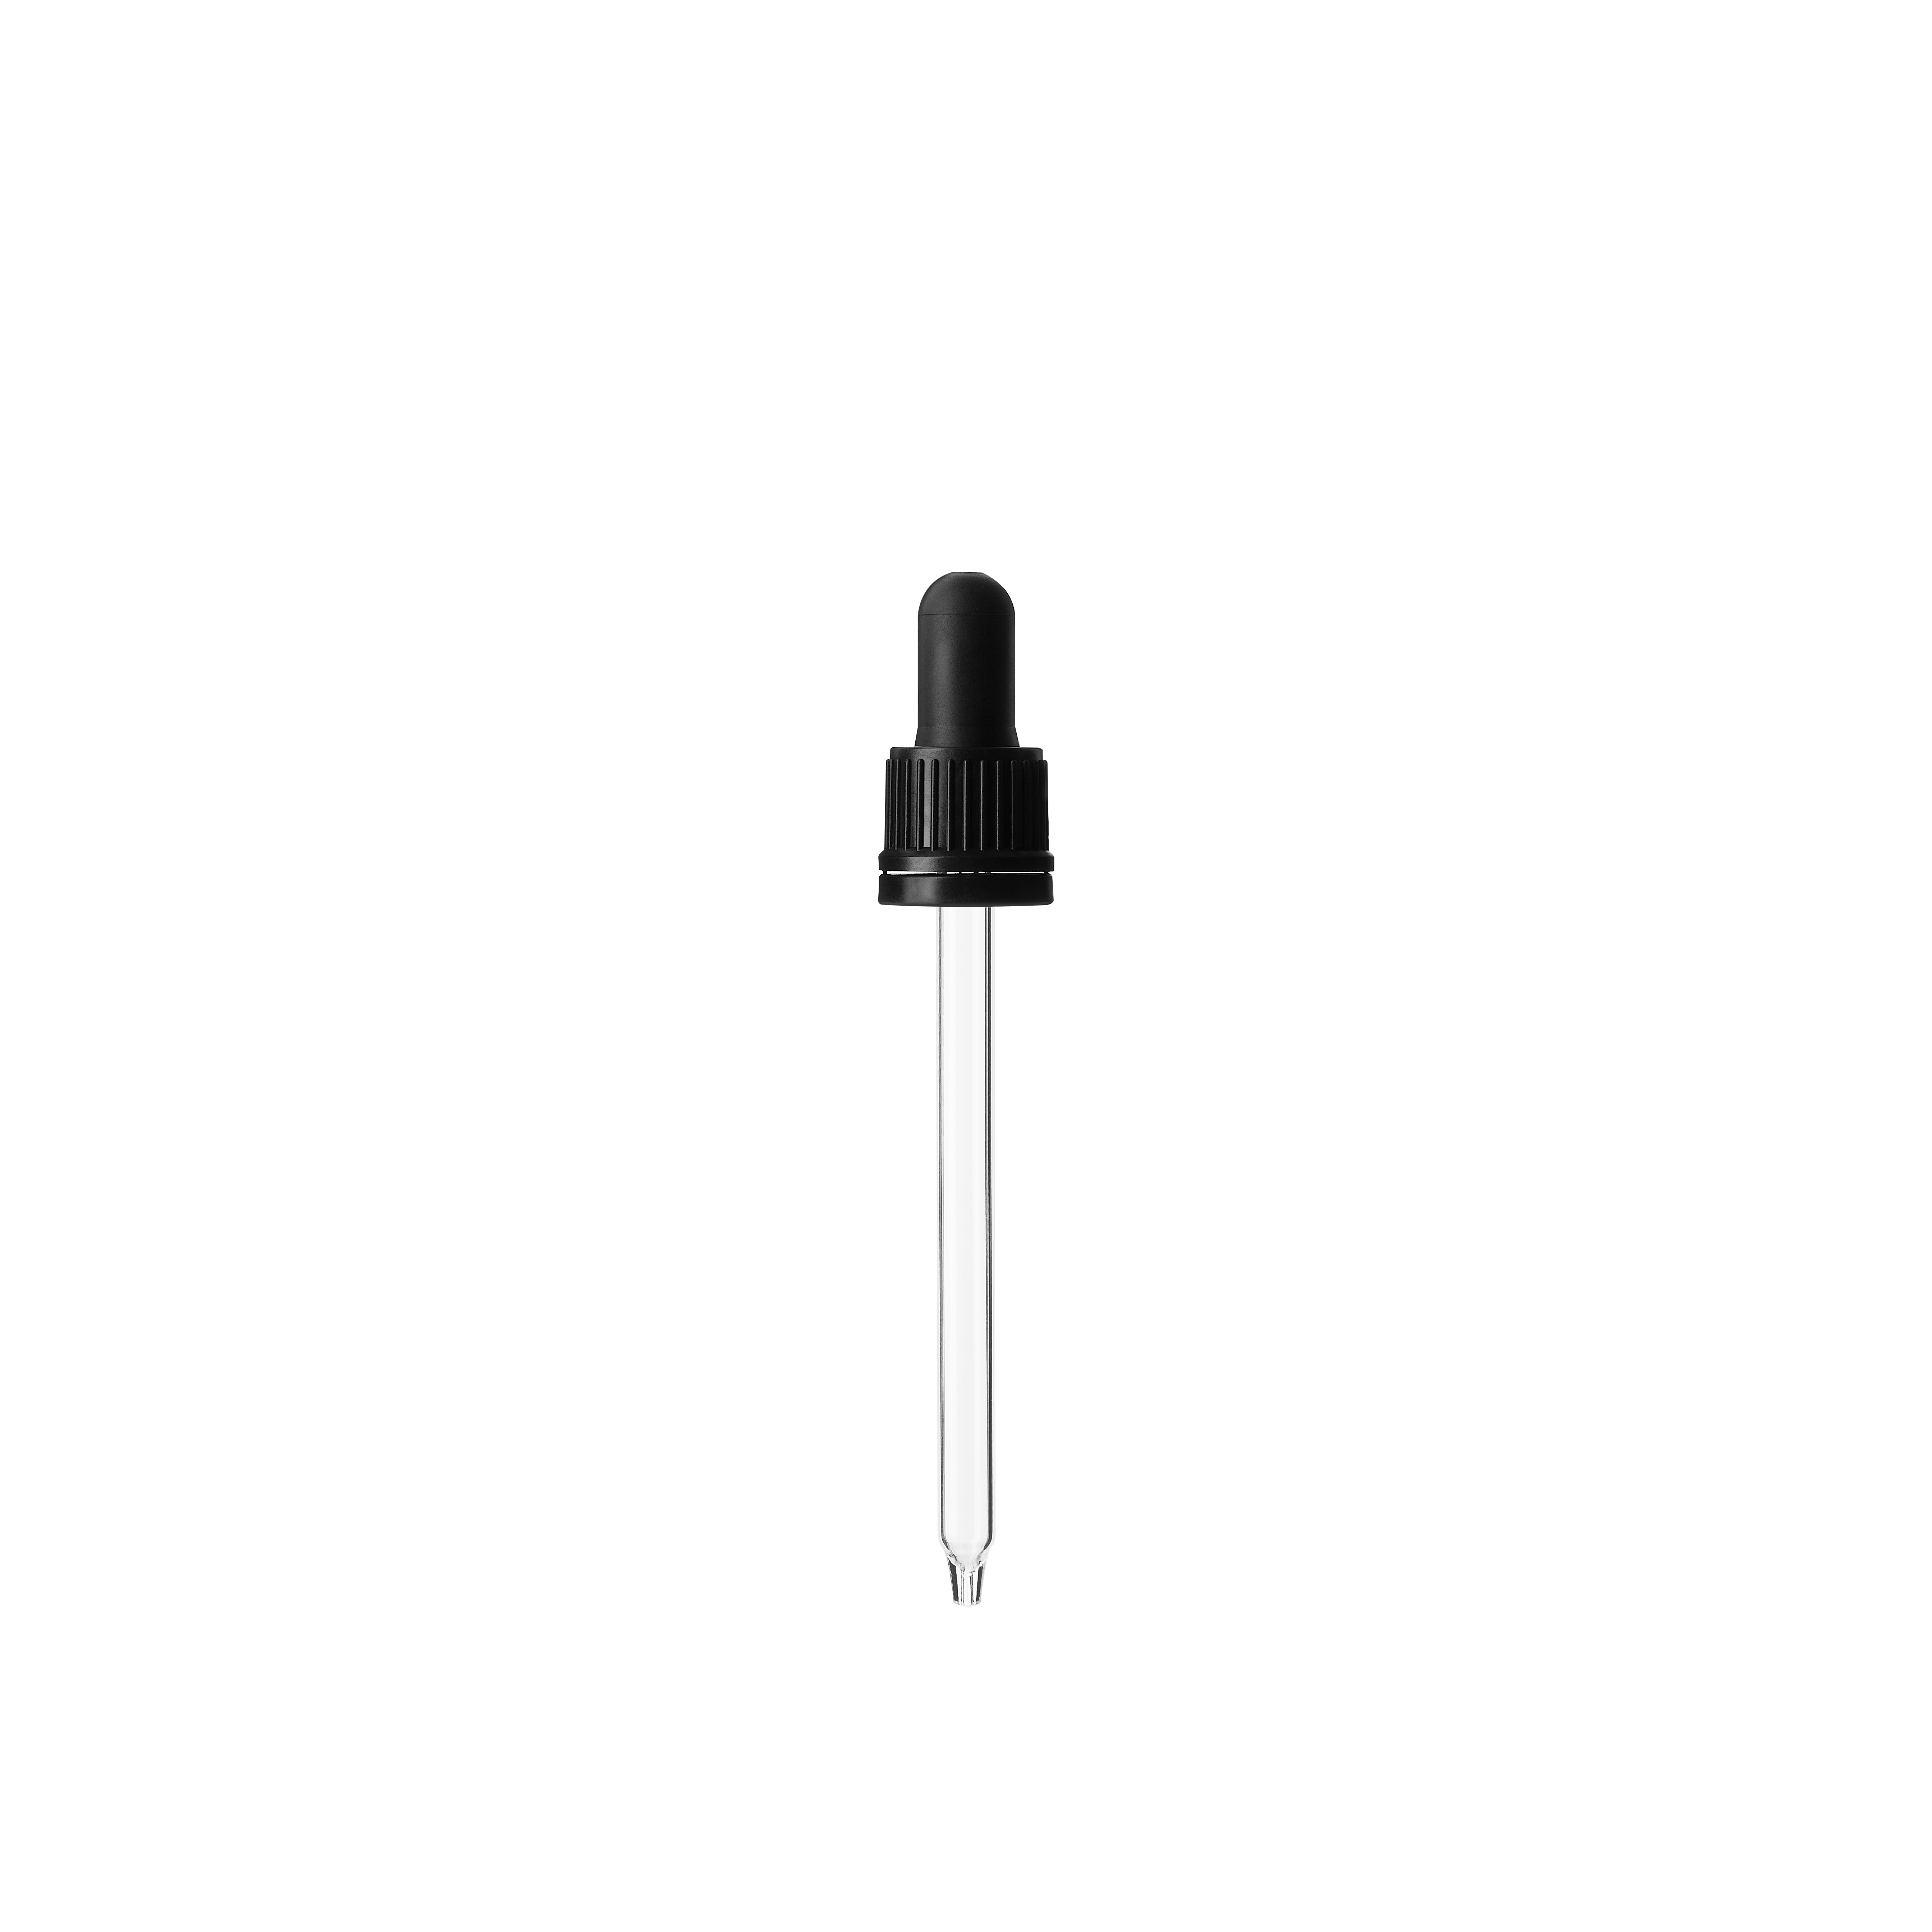 Pipette series II, DIN18, tamper-evident, PP, black, ribbed, black bulb TPE 1.0 ml, conical tip with 1.0 opening for Ginger 100 ml